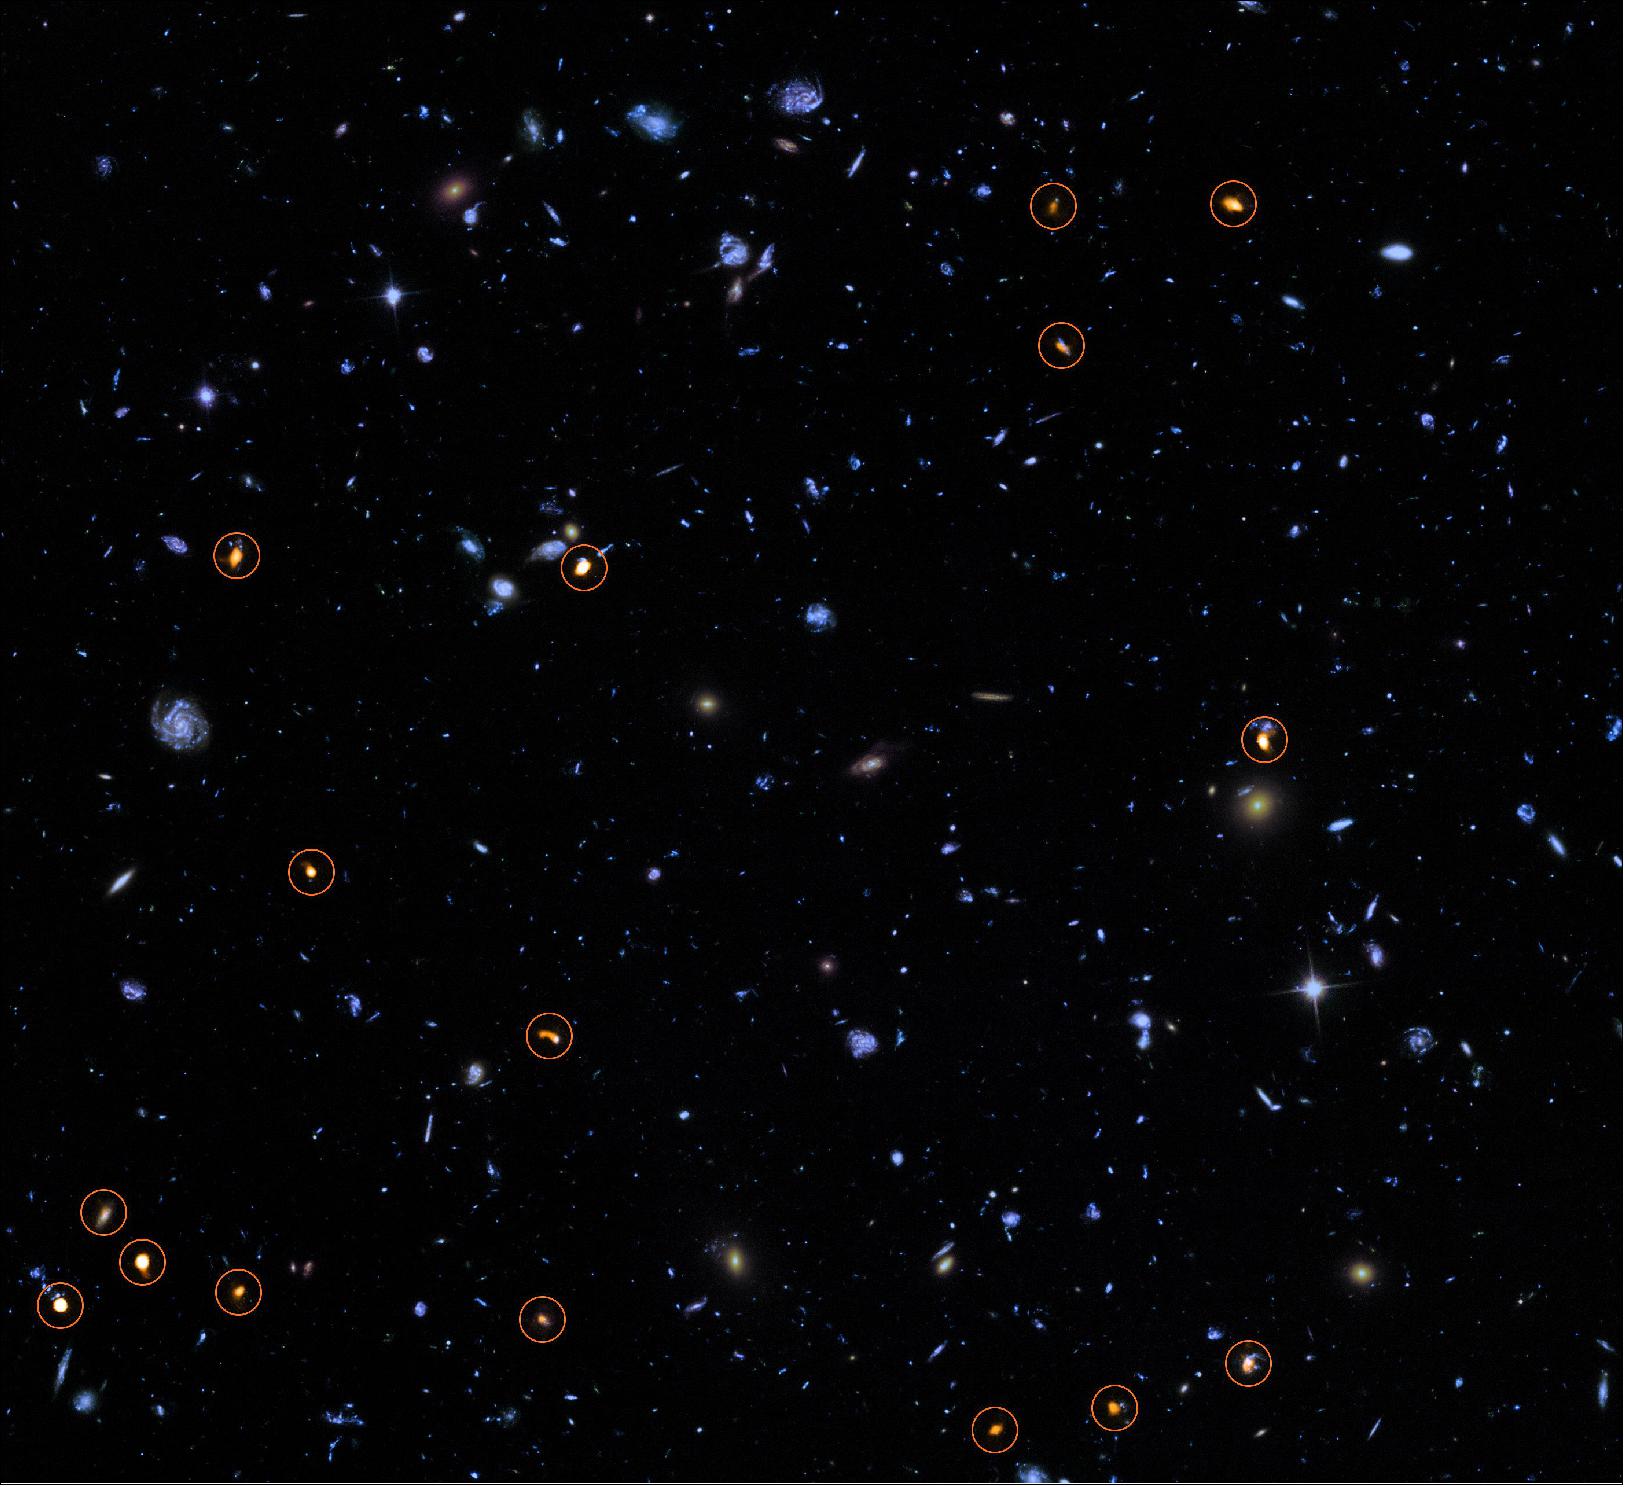 Figure 48: This image combines a background picture taken by the NASA/ESA Hubble Space Telescope (blue/green) with a new very deep ALMA view of this field (orange, marked with circles). All the objects that ALMA sees appear to be massive star-forming galaxies (image credit: ALMA (ESO/NAOJ/NRAO)/NASA/ESA/J. Dunlop et al. and S. Beckwith (STScI) and the HUDF Team)